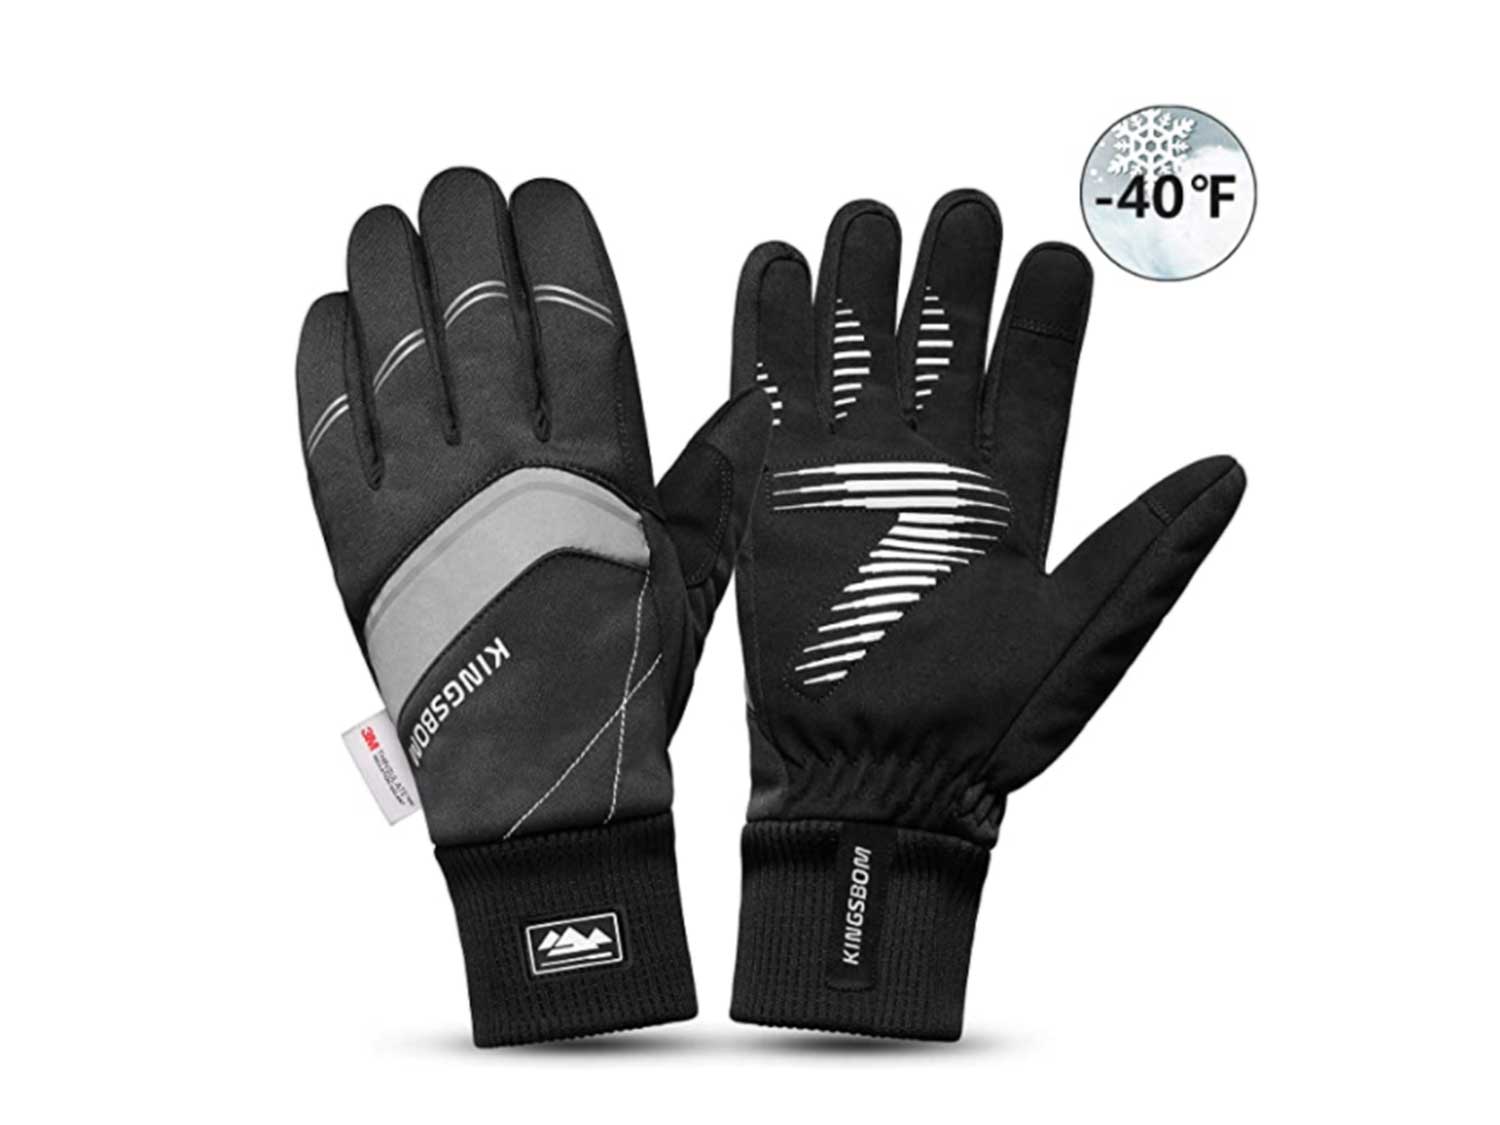 KINGSBOM Waterproof Warm Gloves - 3M Thinsulate Winter Touch Screen Thermal Gloves- for Cycling, Running, Riding, Outdoor Sports - for Women and Men – Black